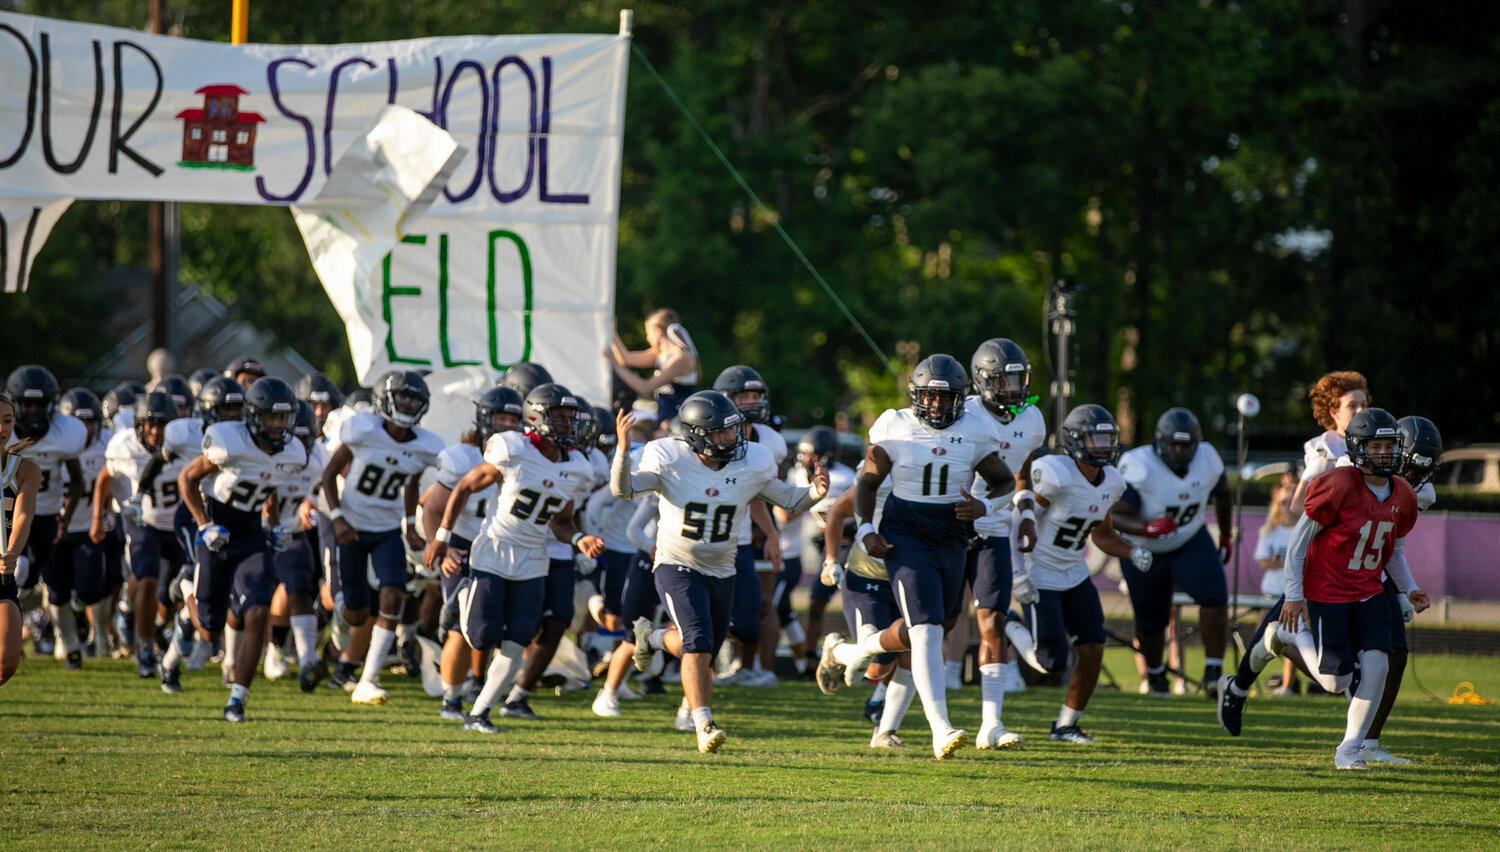 The Foley Lions take the field at Jubilee Stadium as part of their spring game against the Daphne Trojans on May 19. Foley is set to be back at home this week for its rivalry contest with the Baldwin County Tigers where the Lions own a 23-21-3 record in the all-time series.